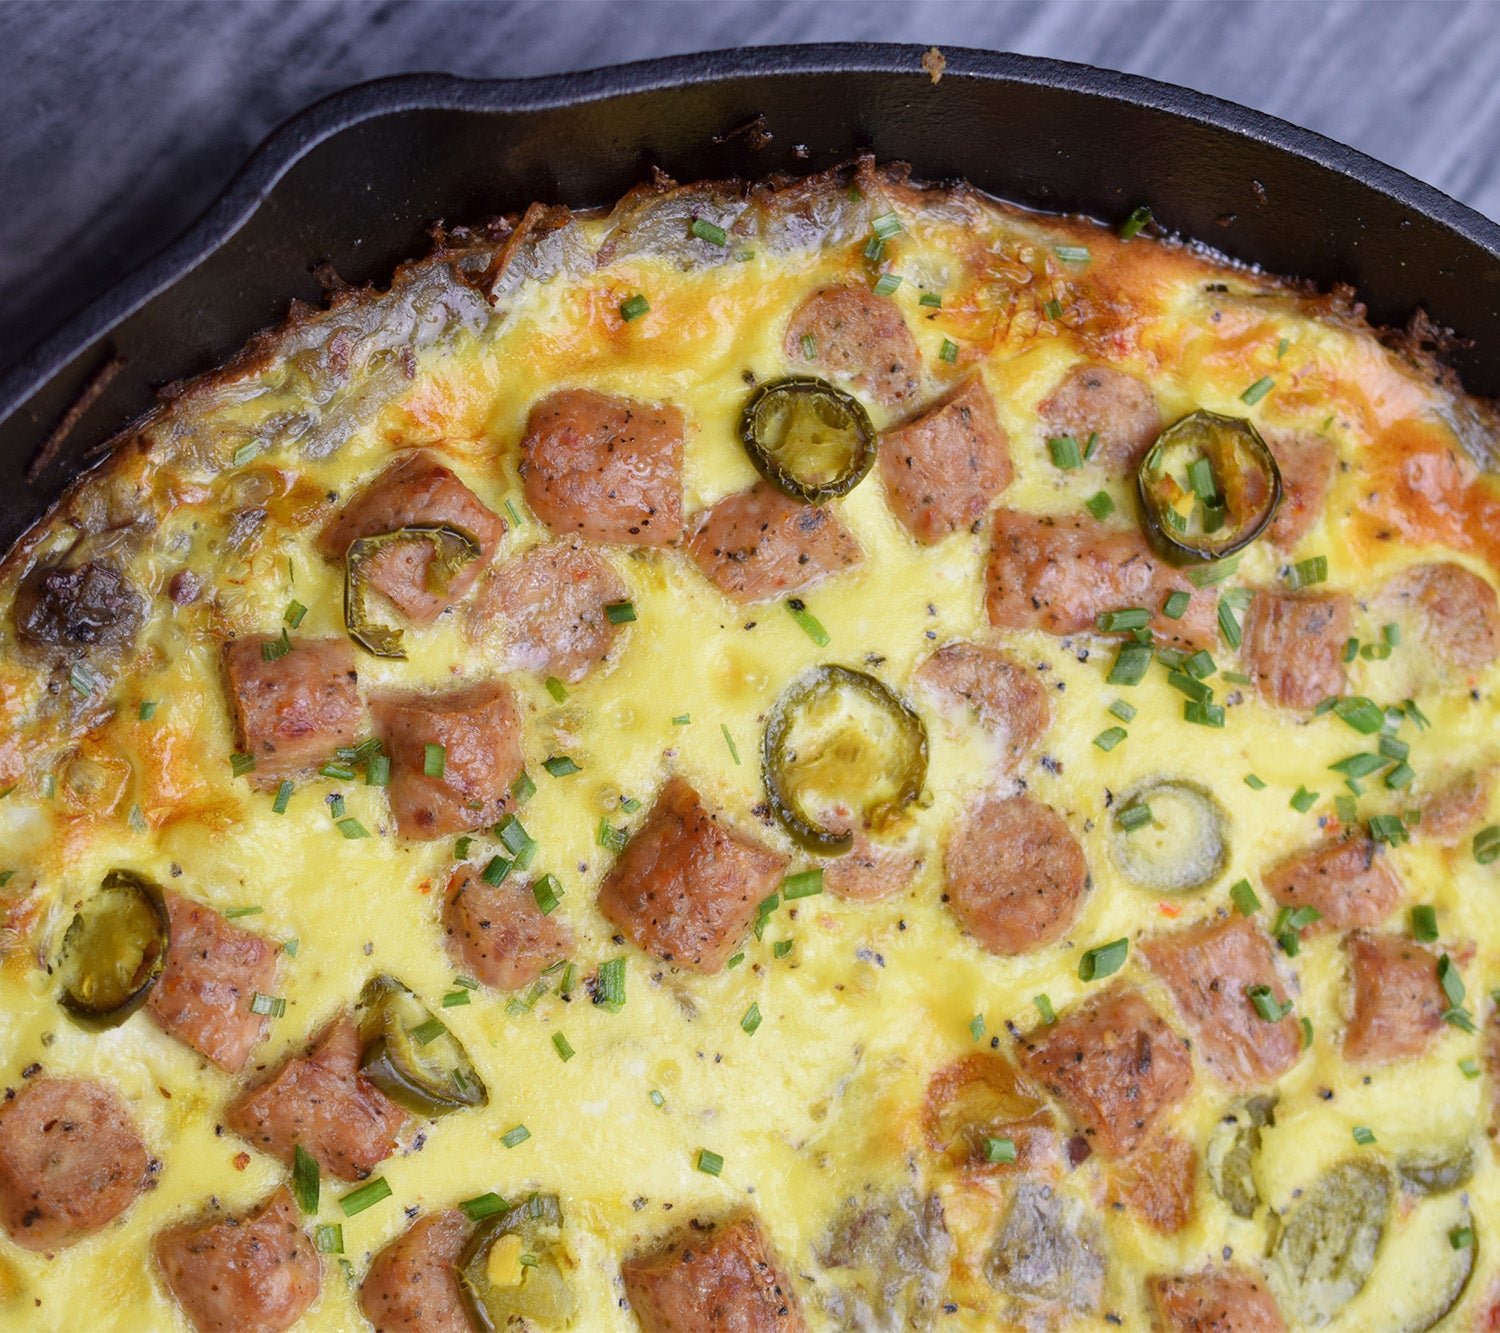 Hot dish filled with chopped up Spicy Breakfast Sausage Links, jalapeno, and green onions.